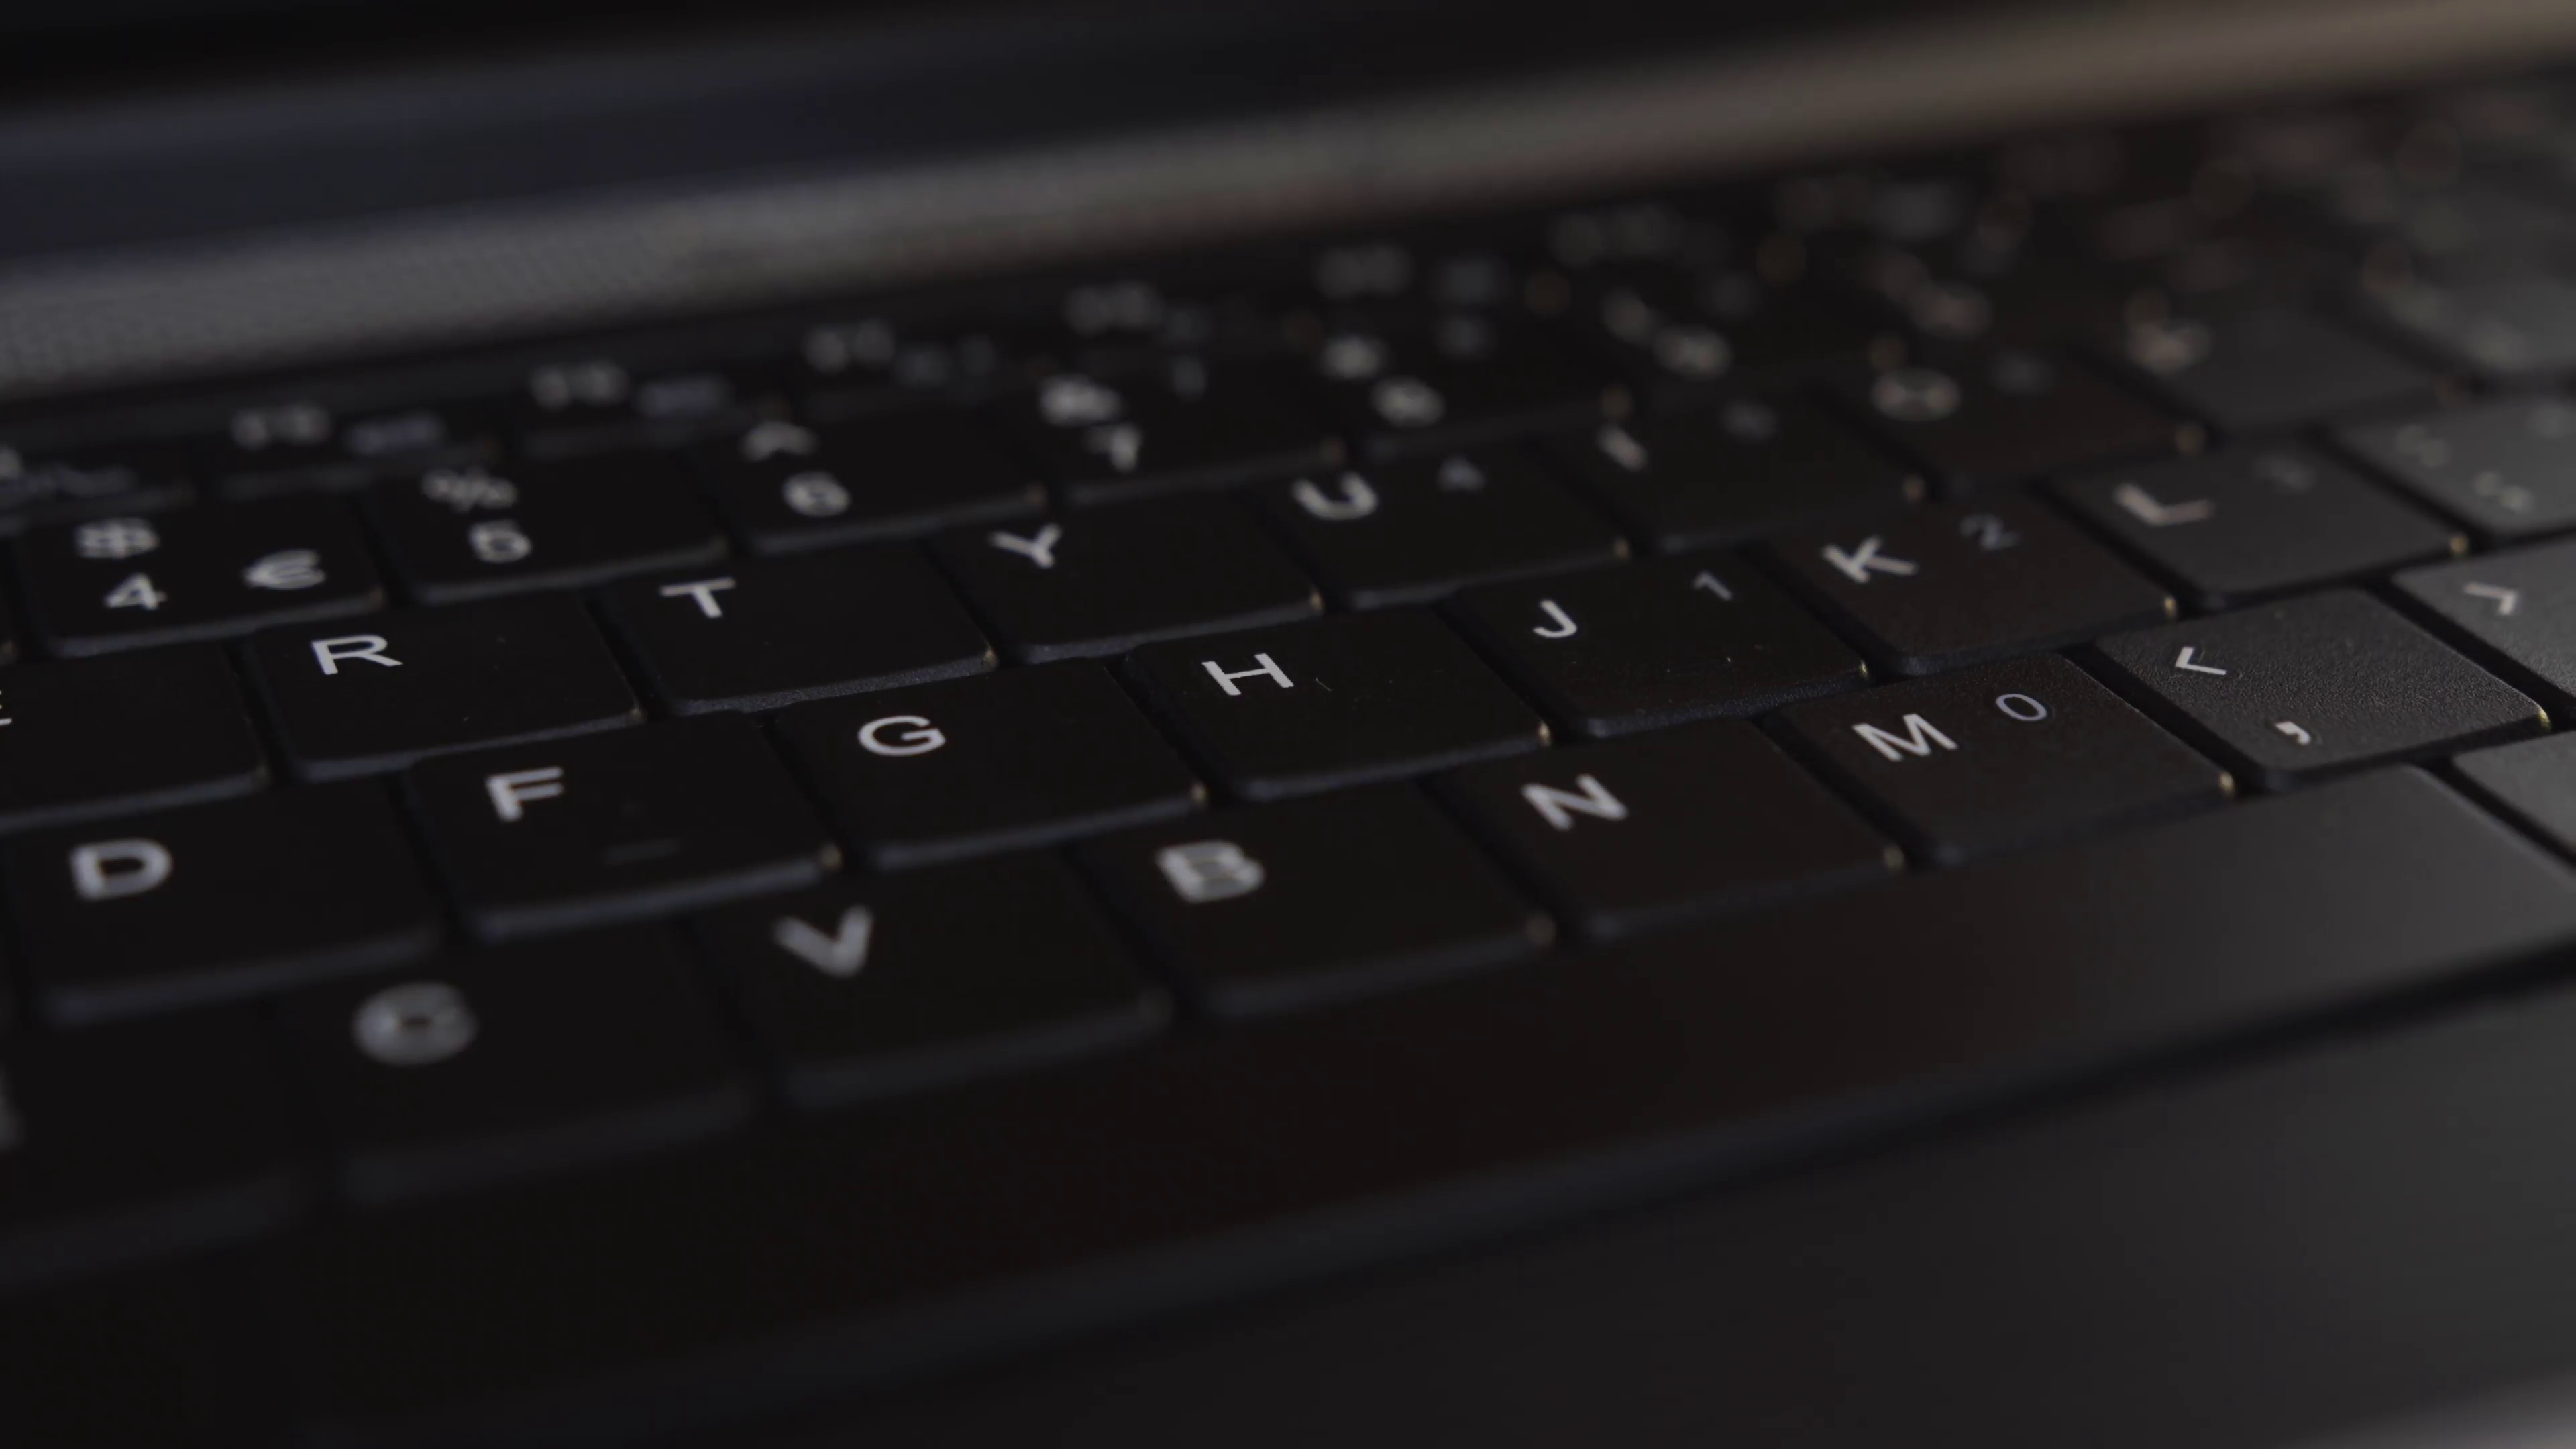 Black Computer keyboard extreme close up UHD stock footage. A black ...